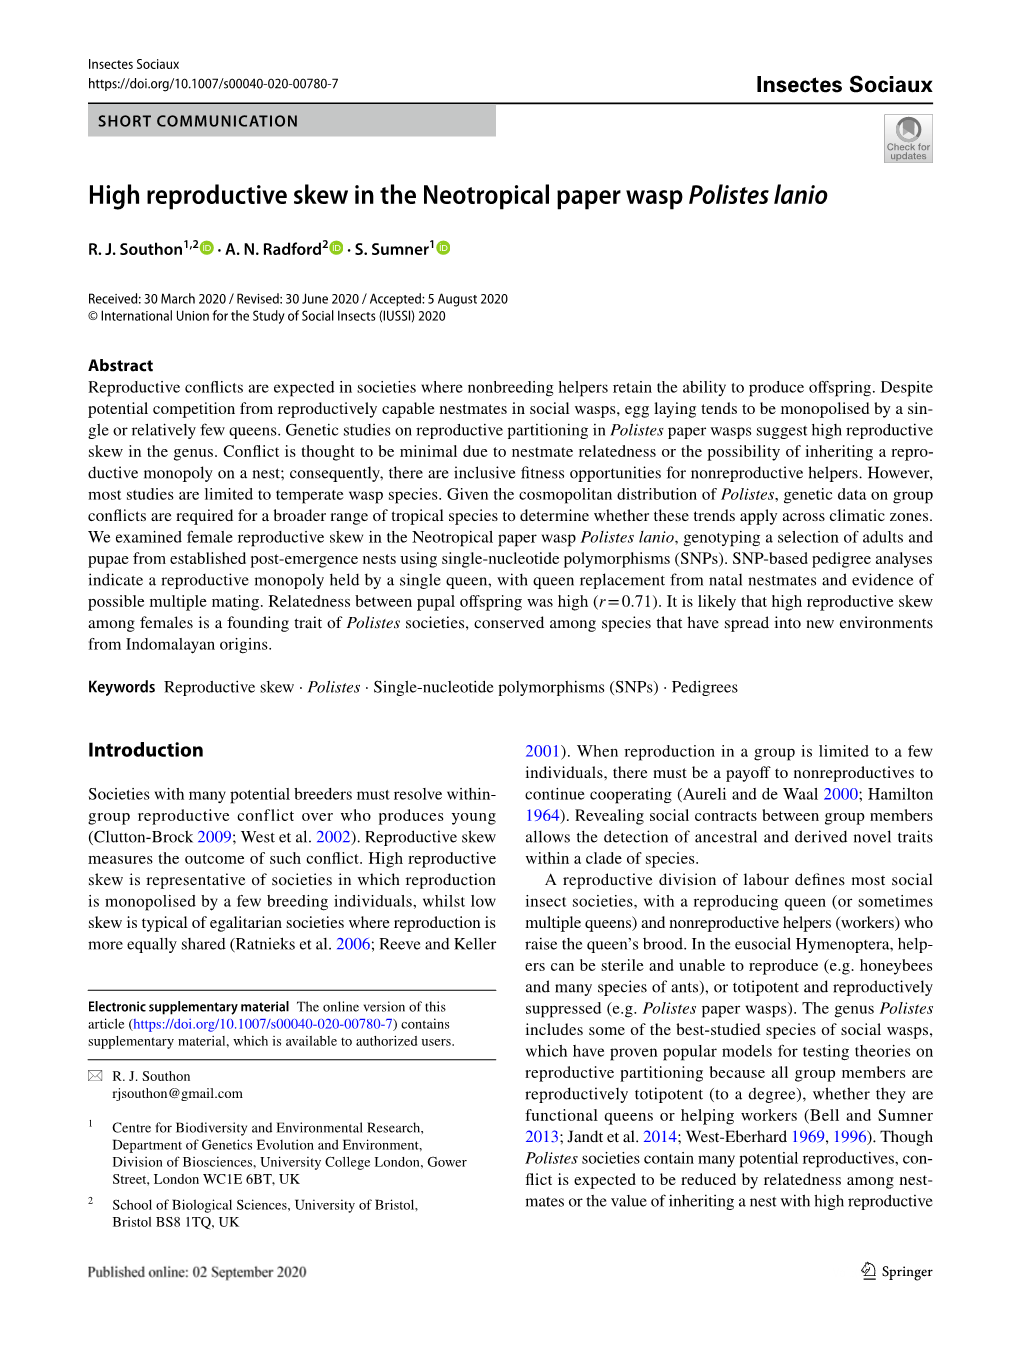 High Reproductive Skew in the Neotropical Paper Wasp Polistes Lanio